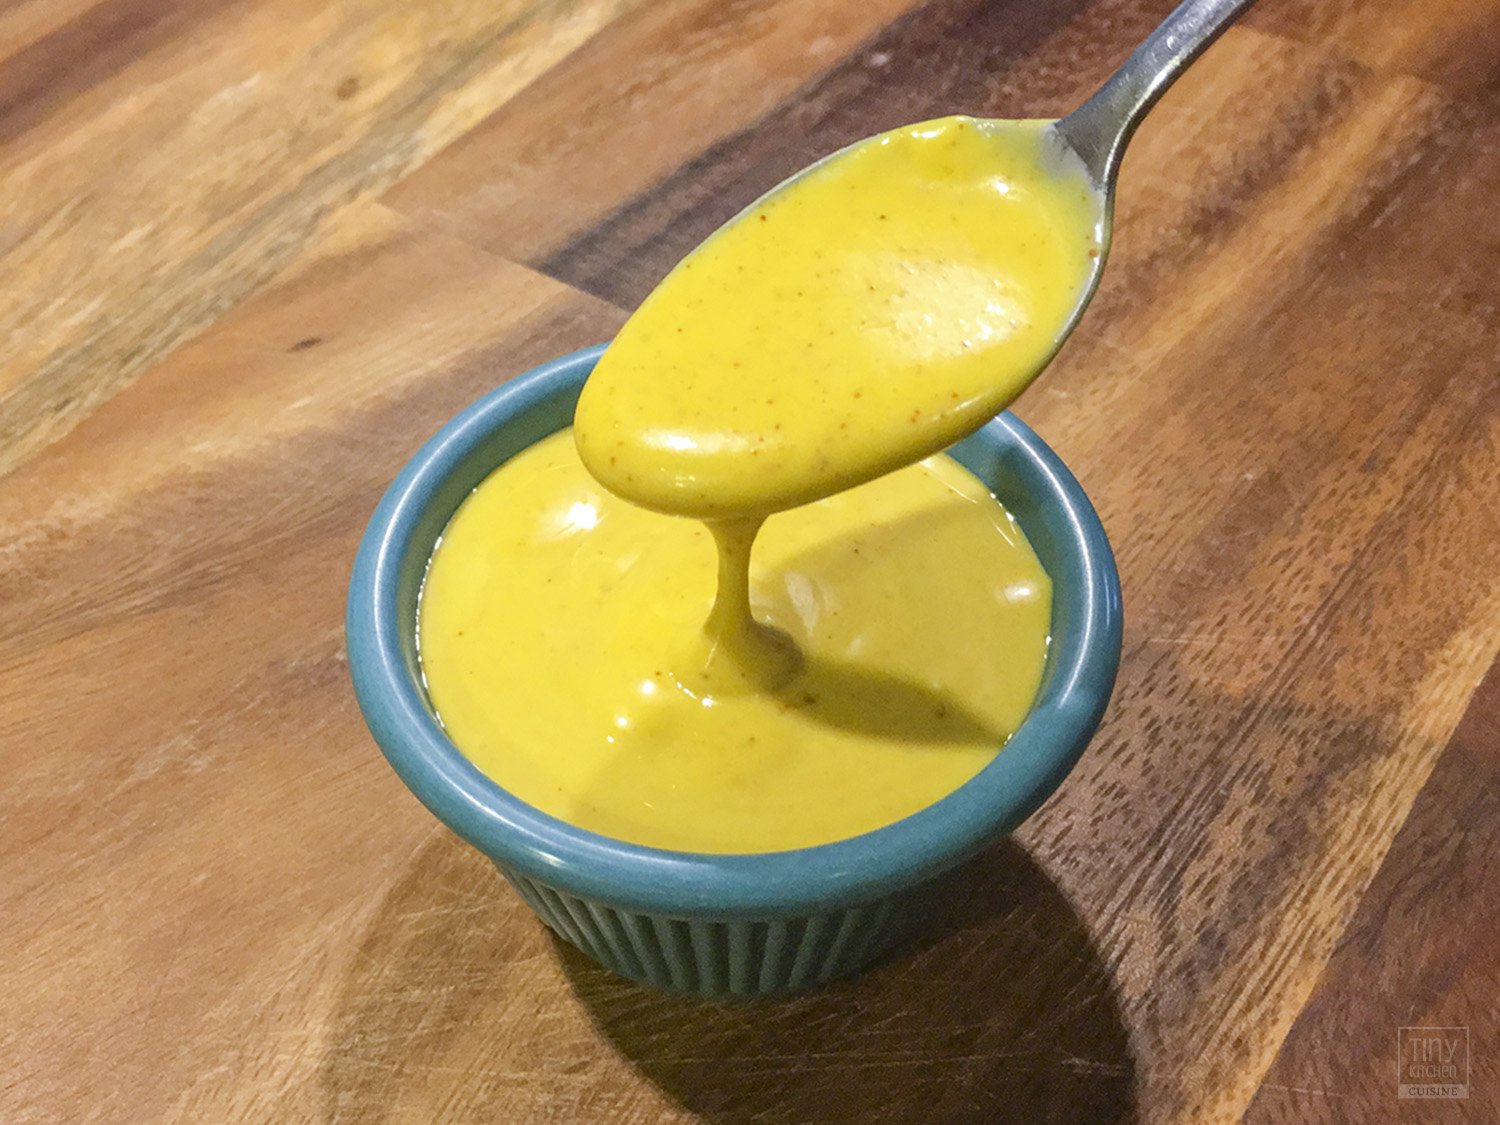 Honey Mustard Sauce Recipe for Dipping or Dressing - Homemade in just 2 minutes! | Tiny Kitchen Cuisine | http://tiny.kitchen